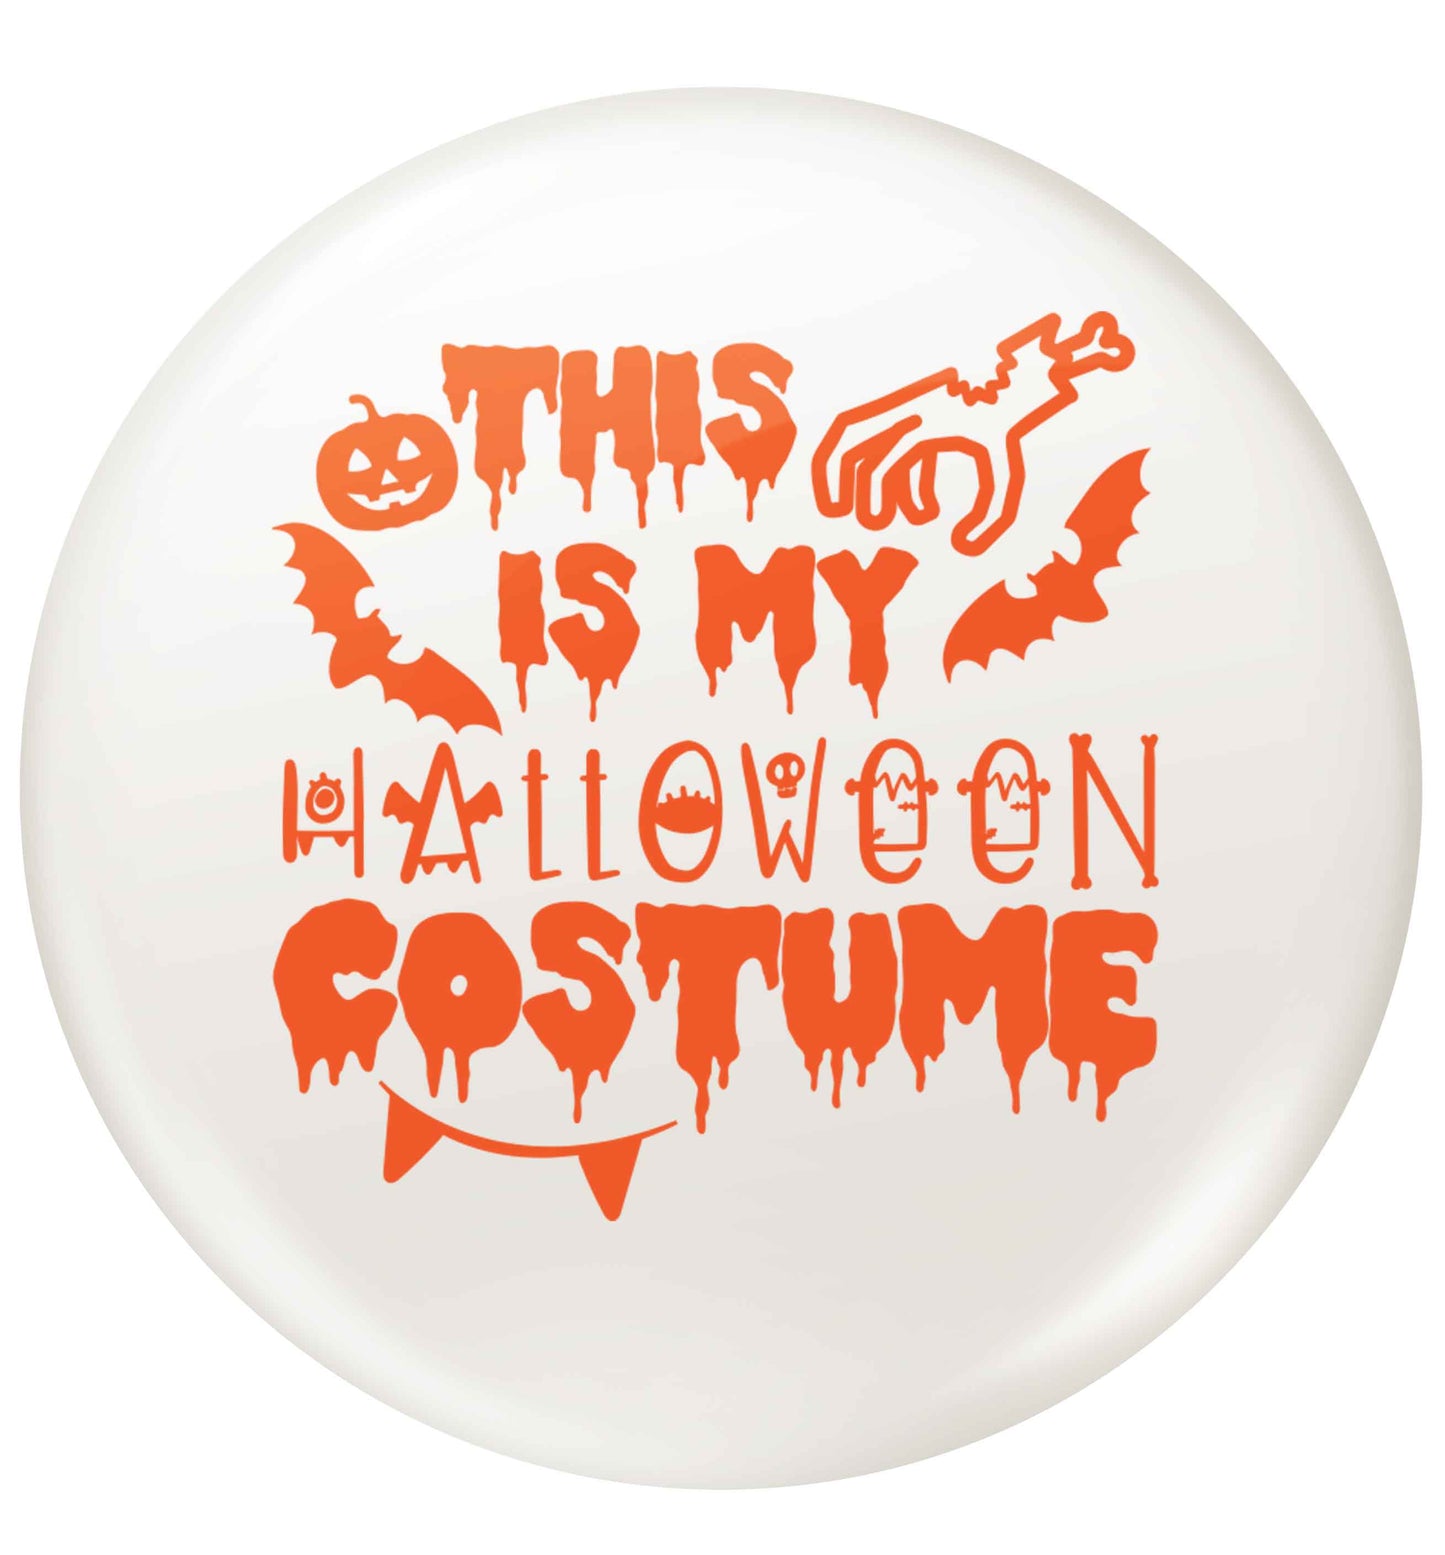 This is my halloween costume small 25mm Pin badge